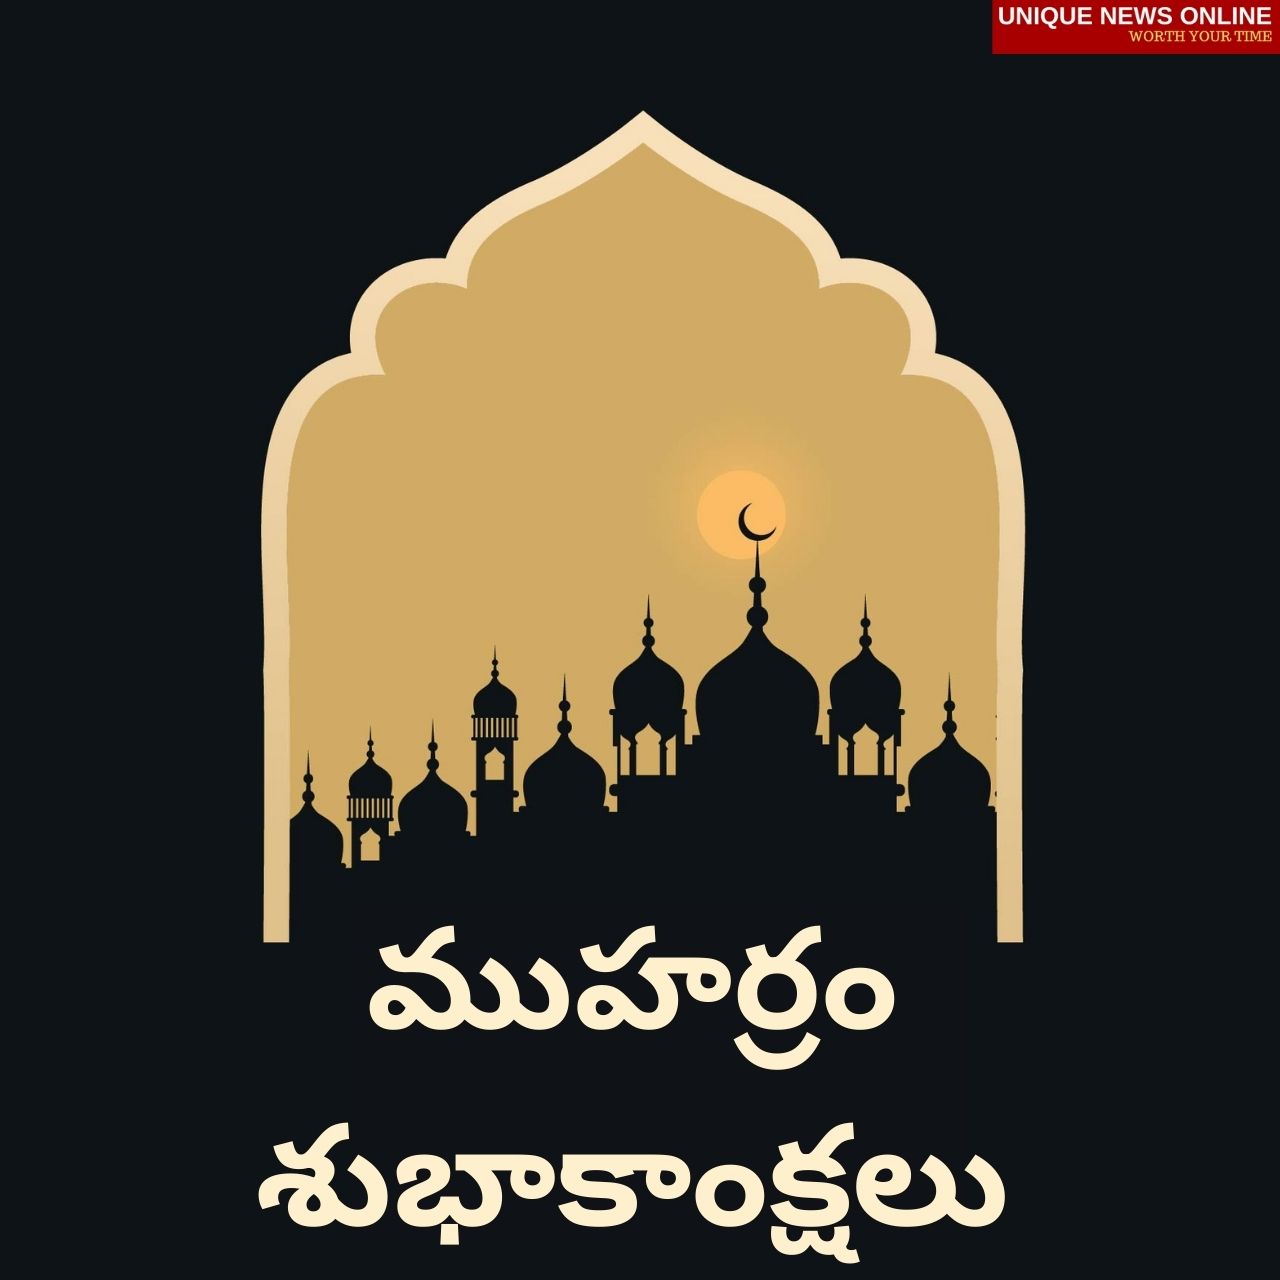 Muharram 2021 Telugu Wishes, Quotes Shayari, Status, Greetings, Messages, and HD Images to greet your Friends and Relatives